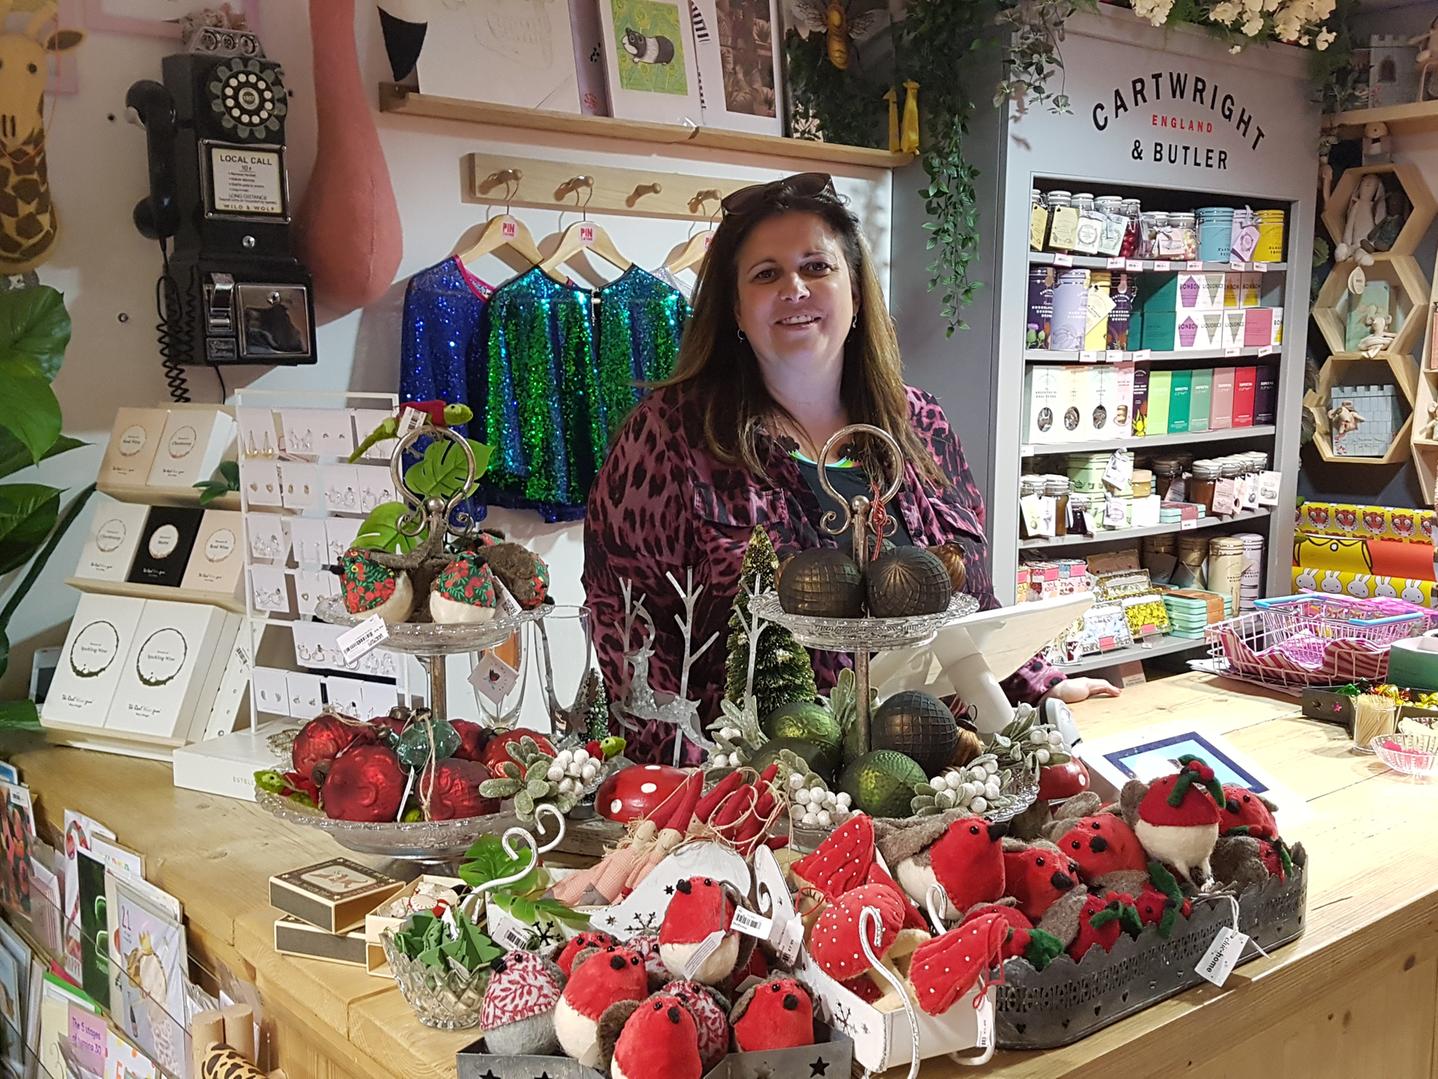 Davina said The Bean Hive is unique for it's carefully selected but wide range of stock. There are locally made items and brands normally available in high-end department stores.